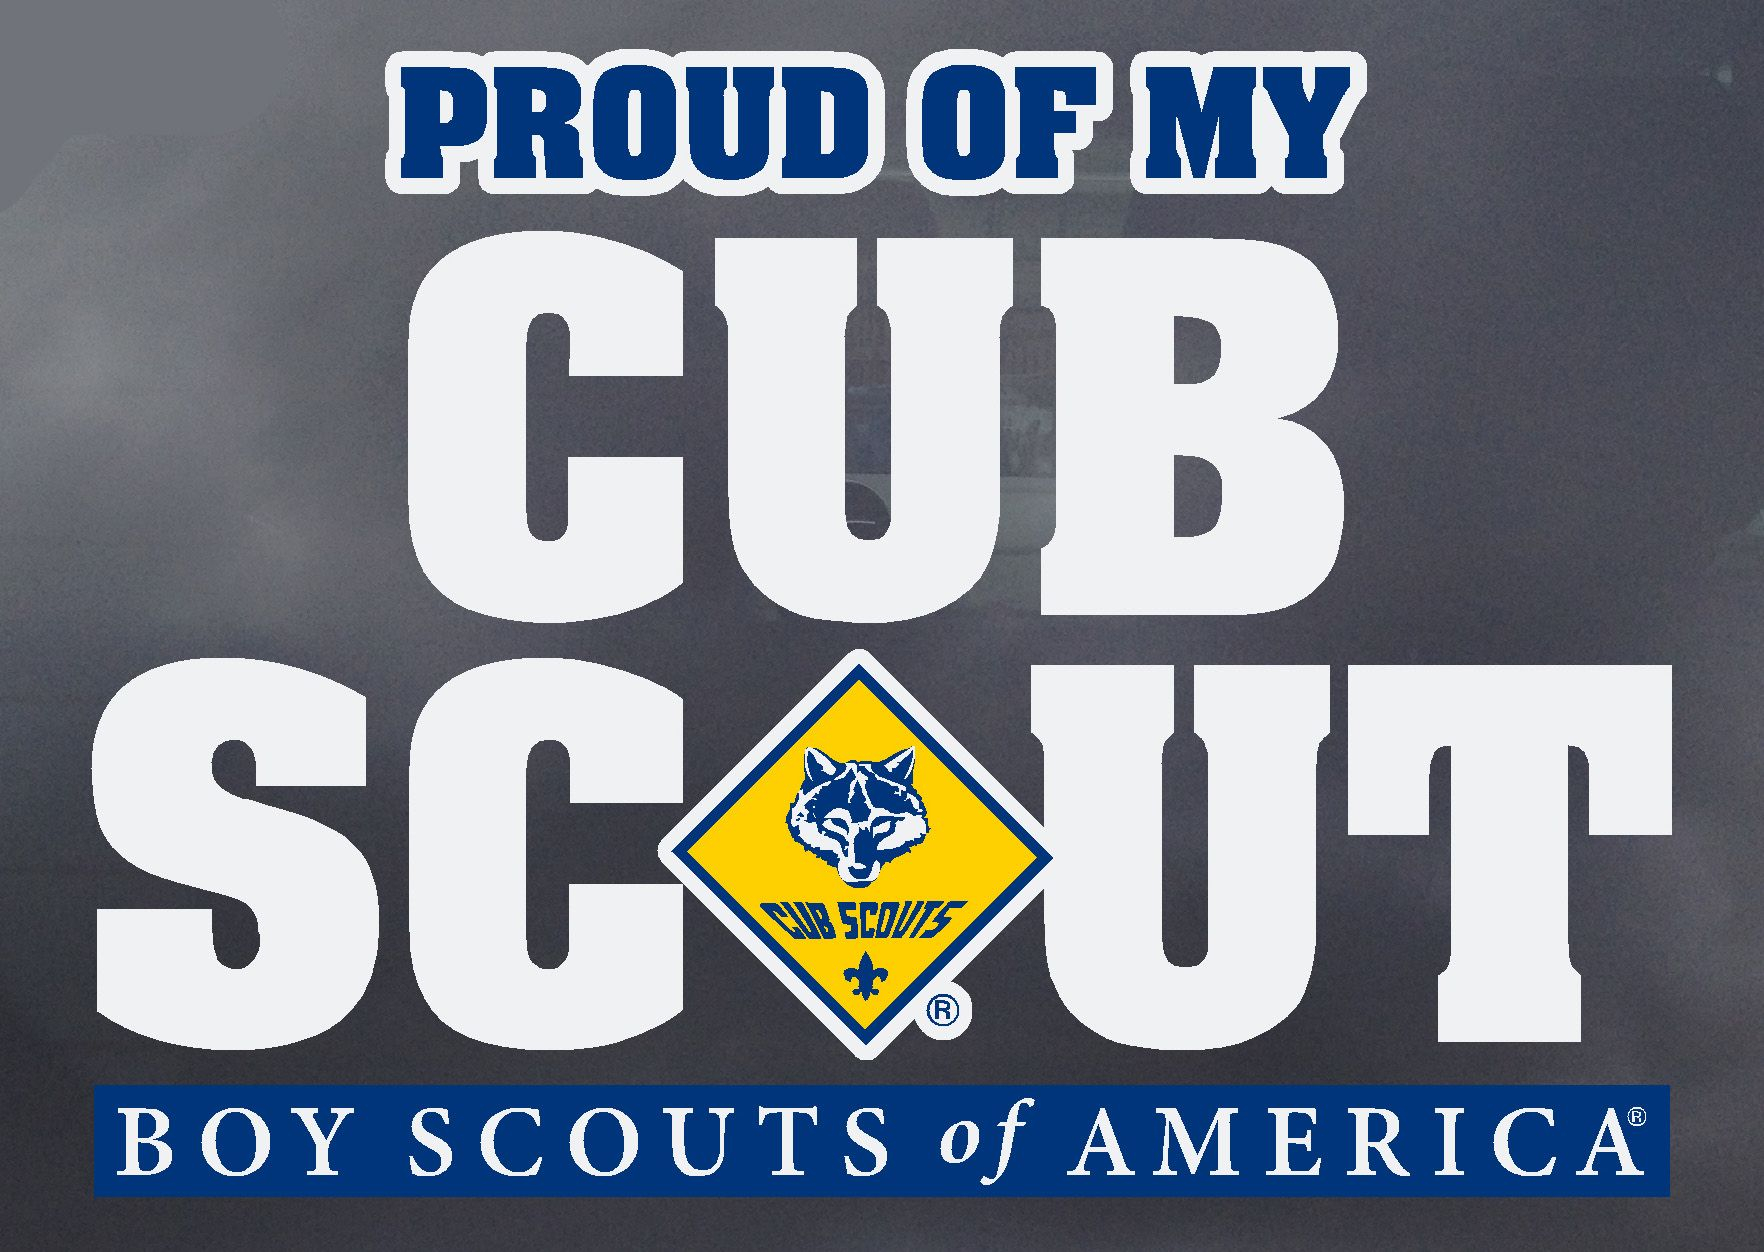 Proud of my Eagle Scout BUMPER STICKER VINYL DECAL SCOUTING BOYS LIFE BSA CUB 